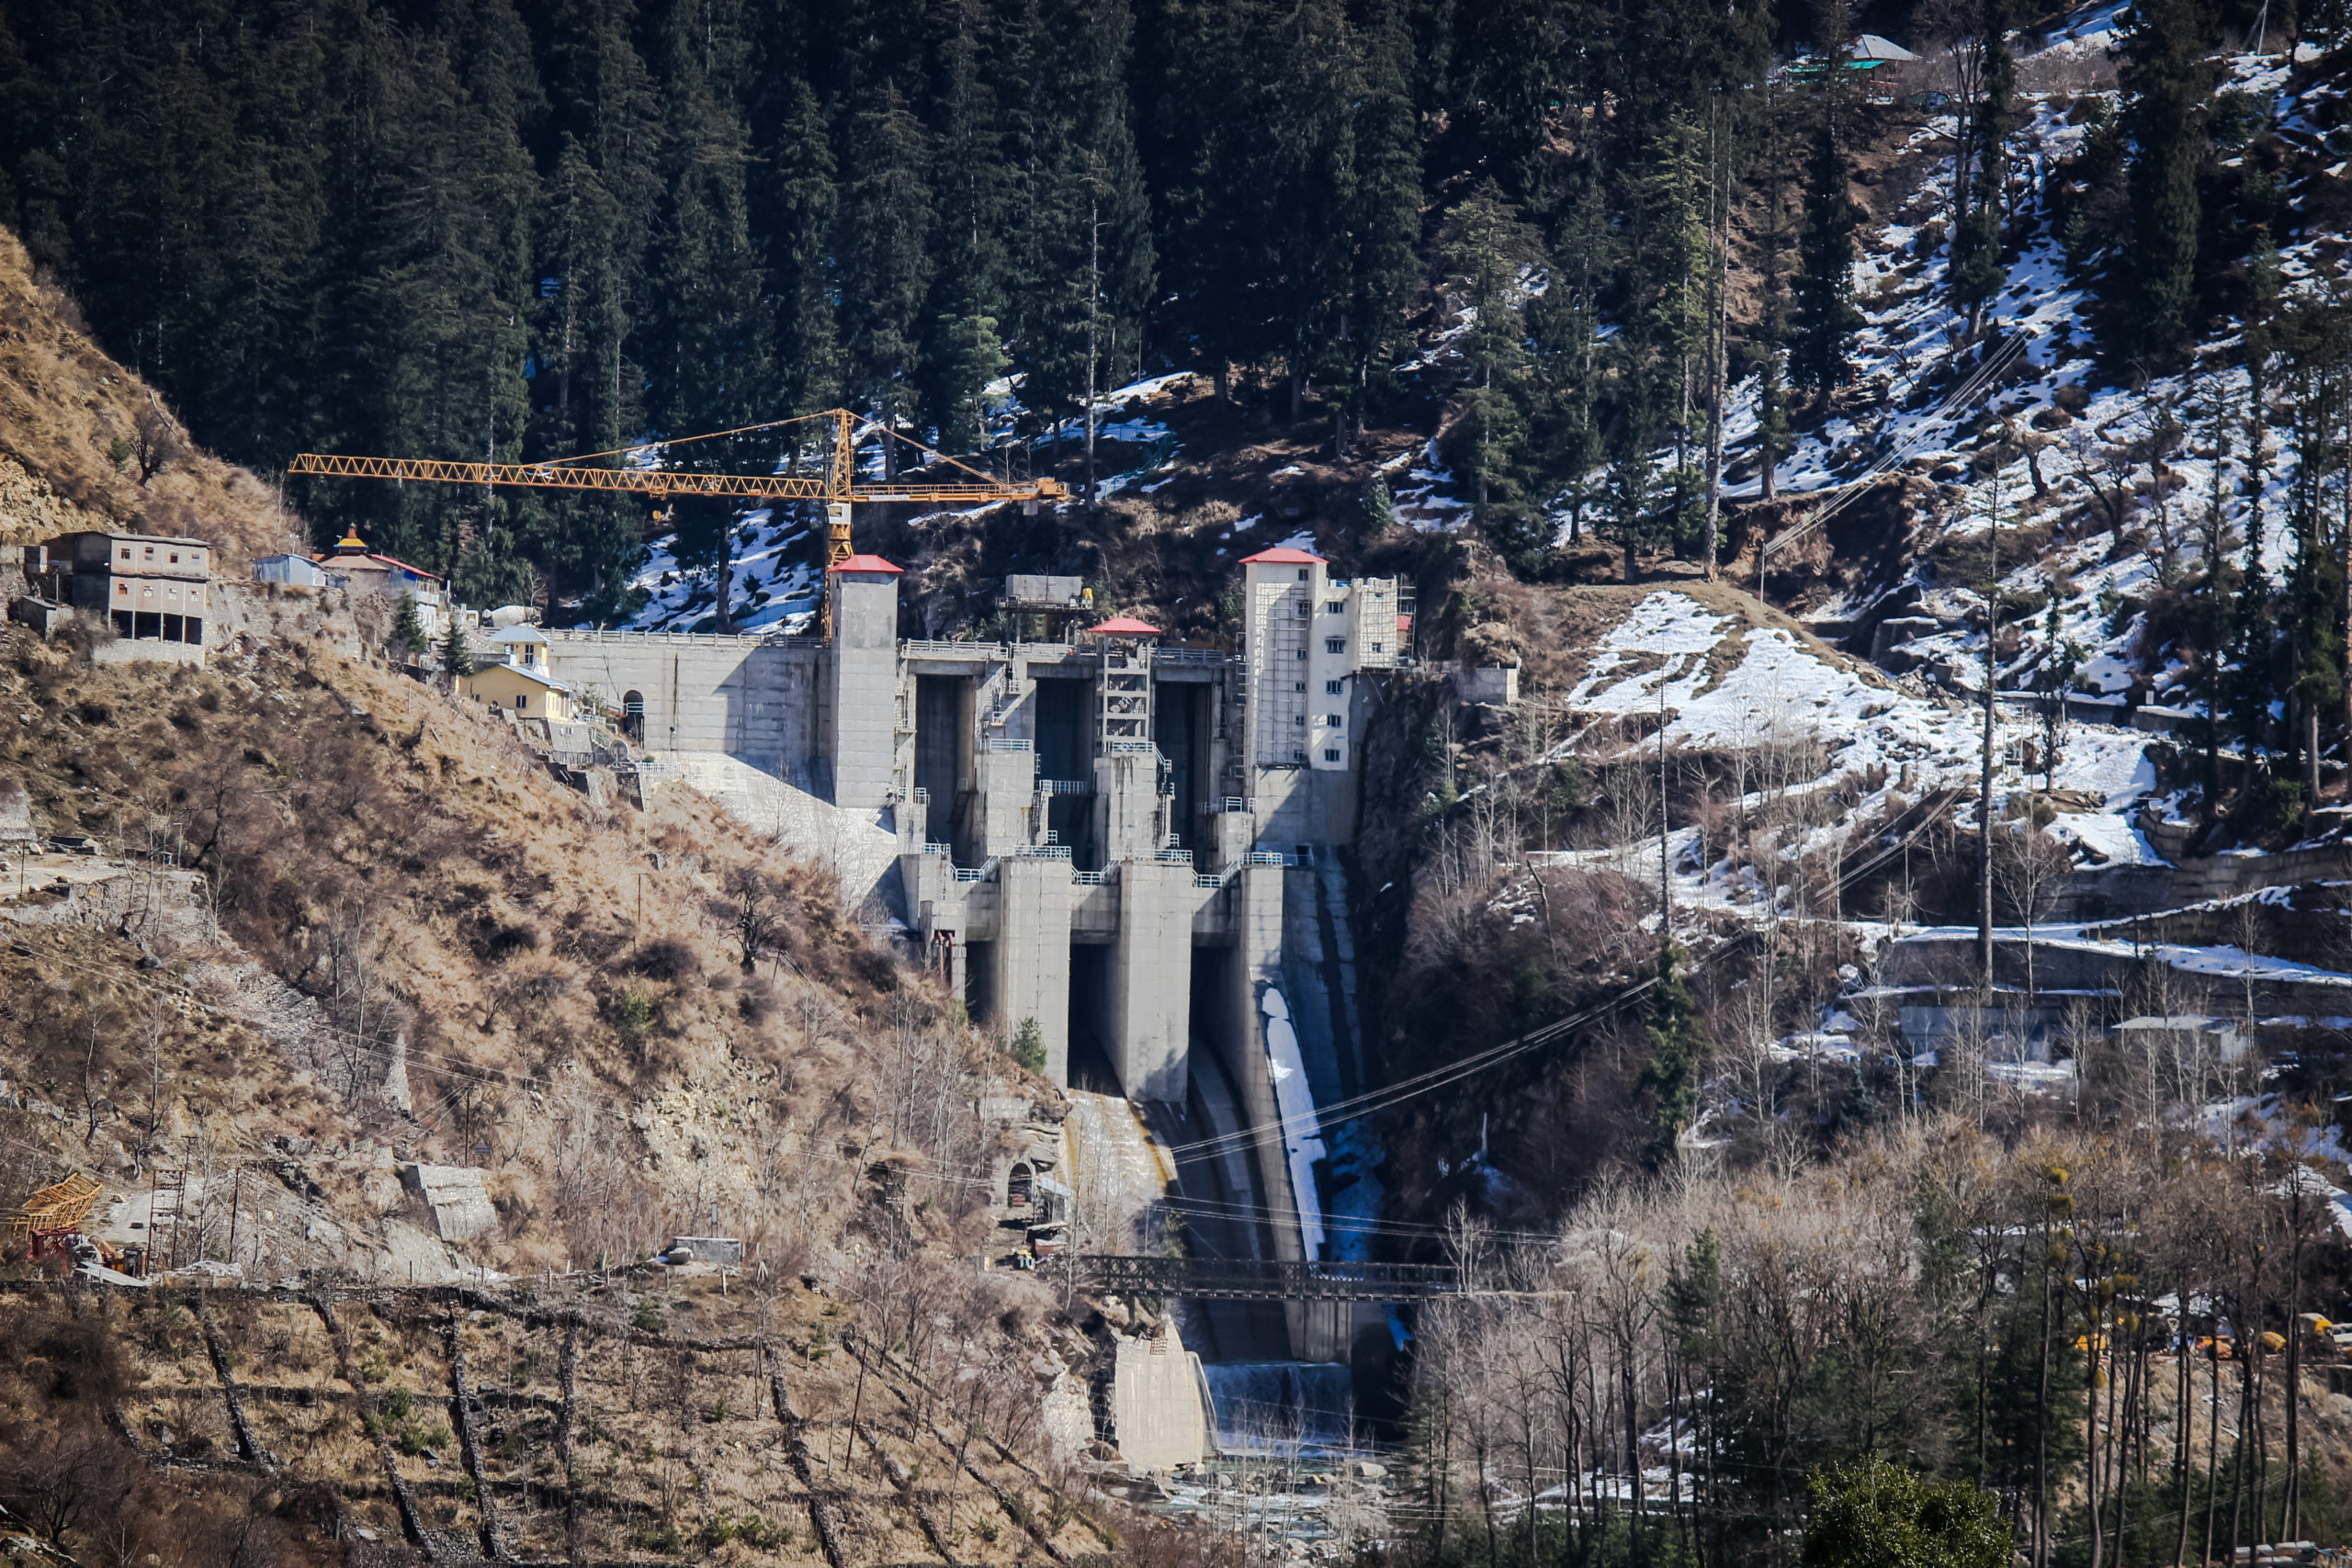 The site of the Parbati II hydroelectric project in Himachal Pradesh,Sumit Mahar